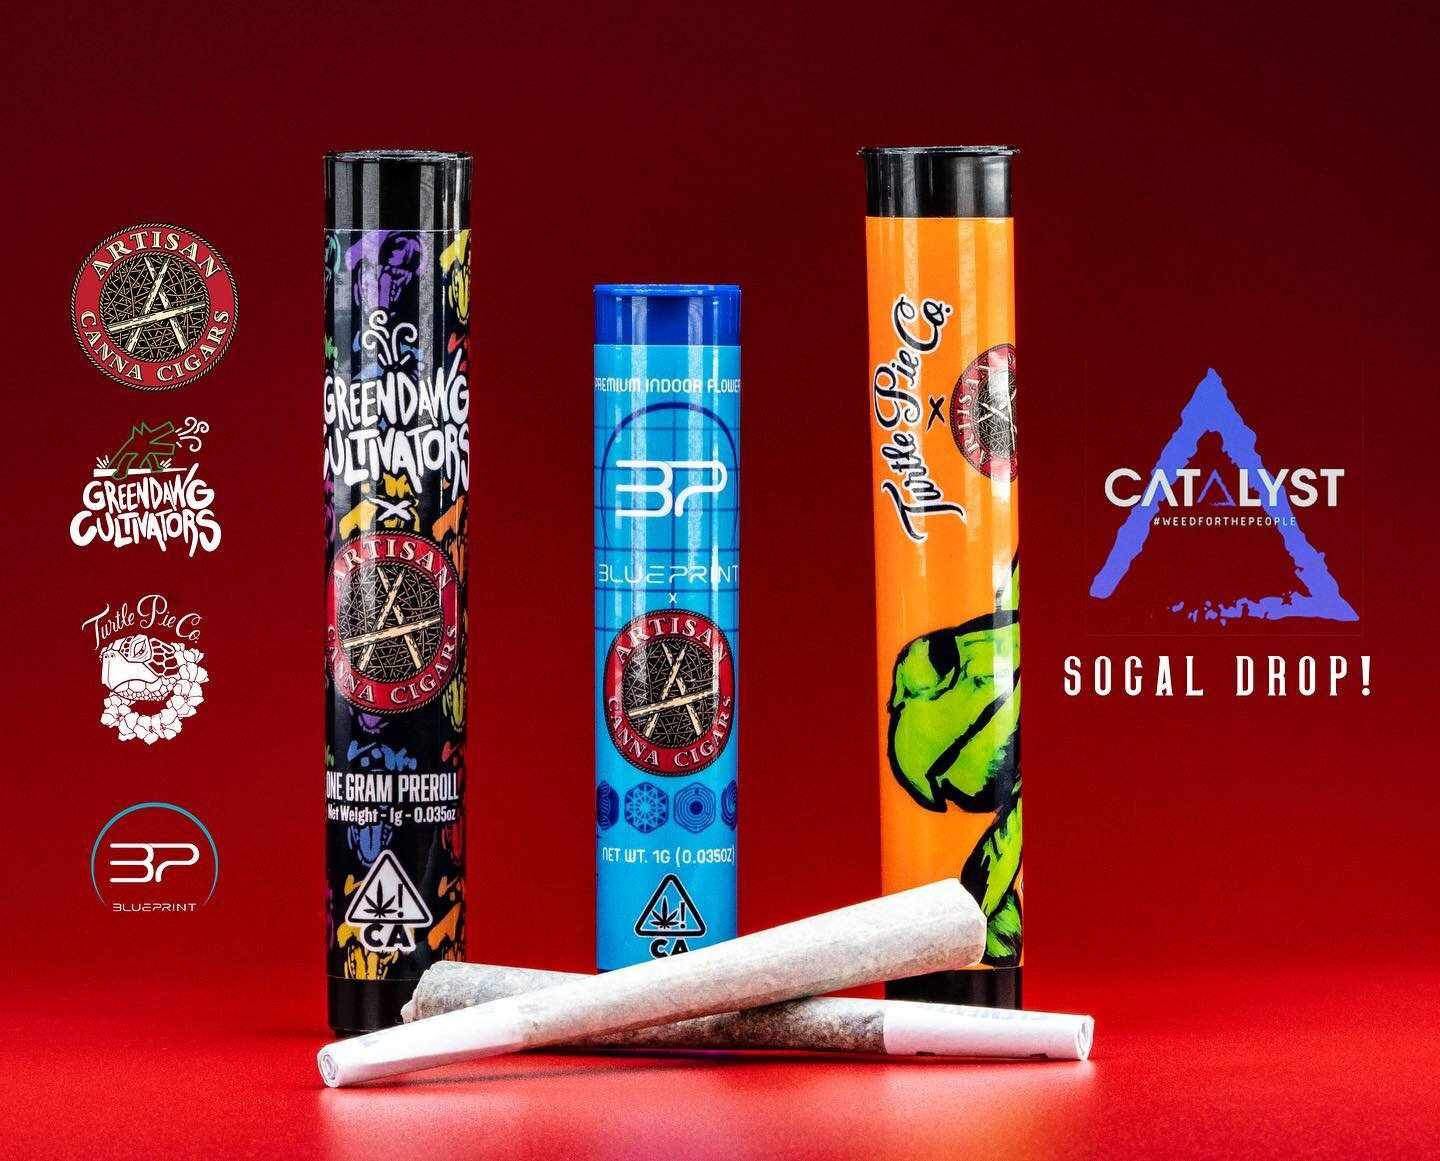 We just made a new SoCal drop @catalyst__bellflower &amp; @catalyst_saa! Check out our 1G Pre-Roll collabs w/ @greendawgca @blueprint_california &amp; @turtlepieco!